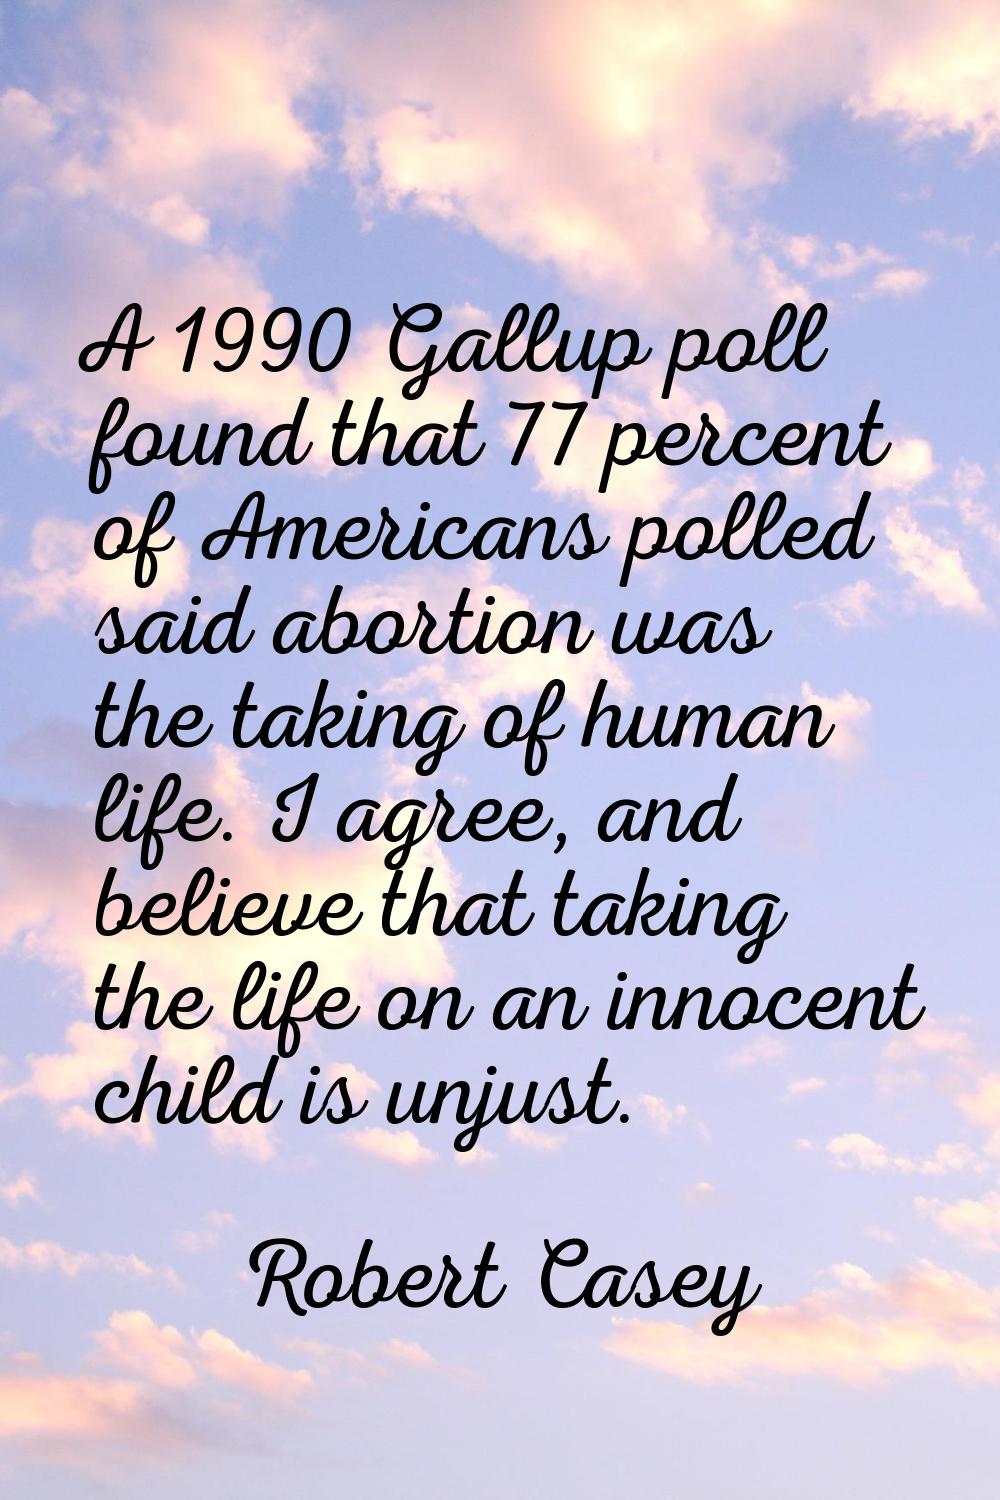 A 1990 Gallup poll found that 77 percent of Americans polled said abortion was the taking of human 